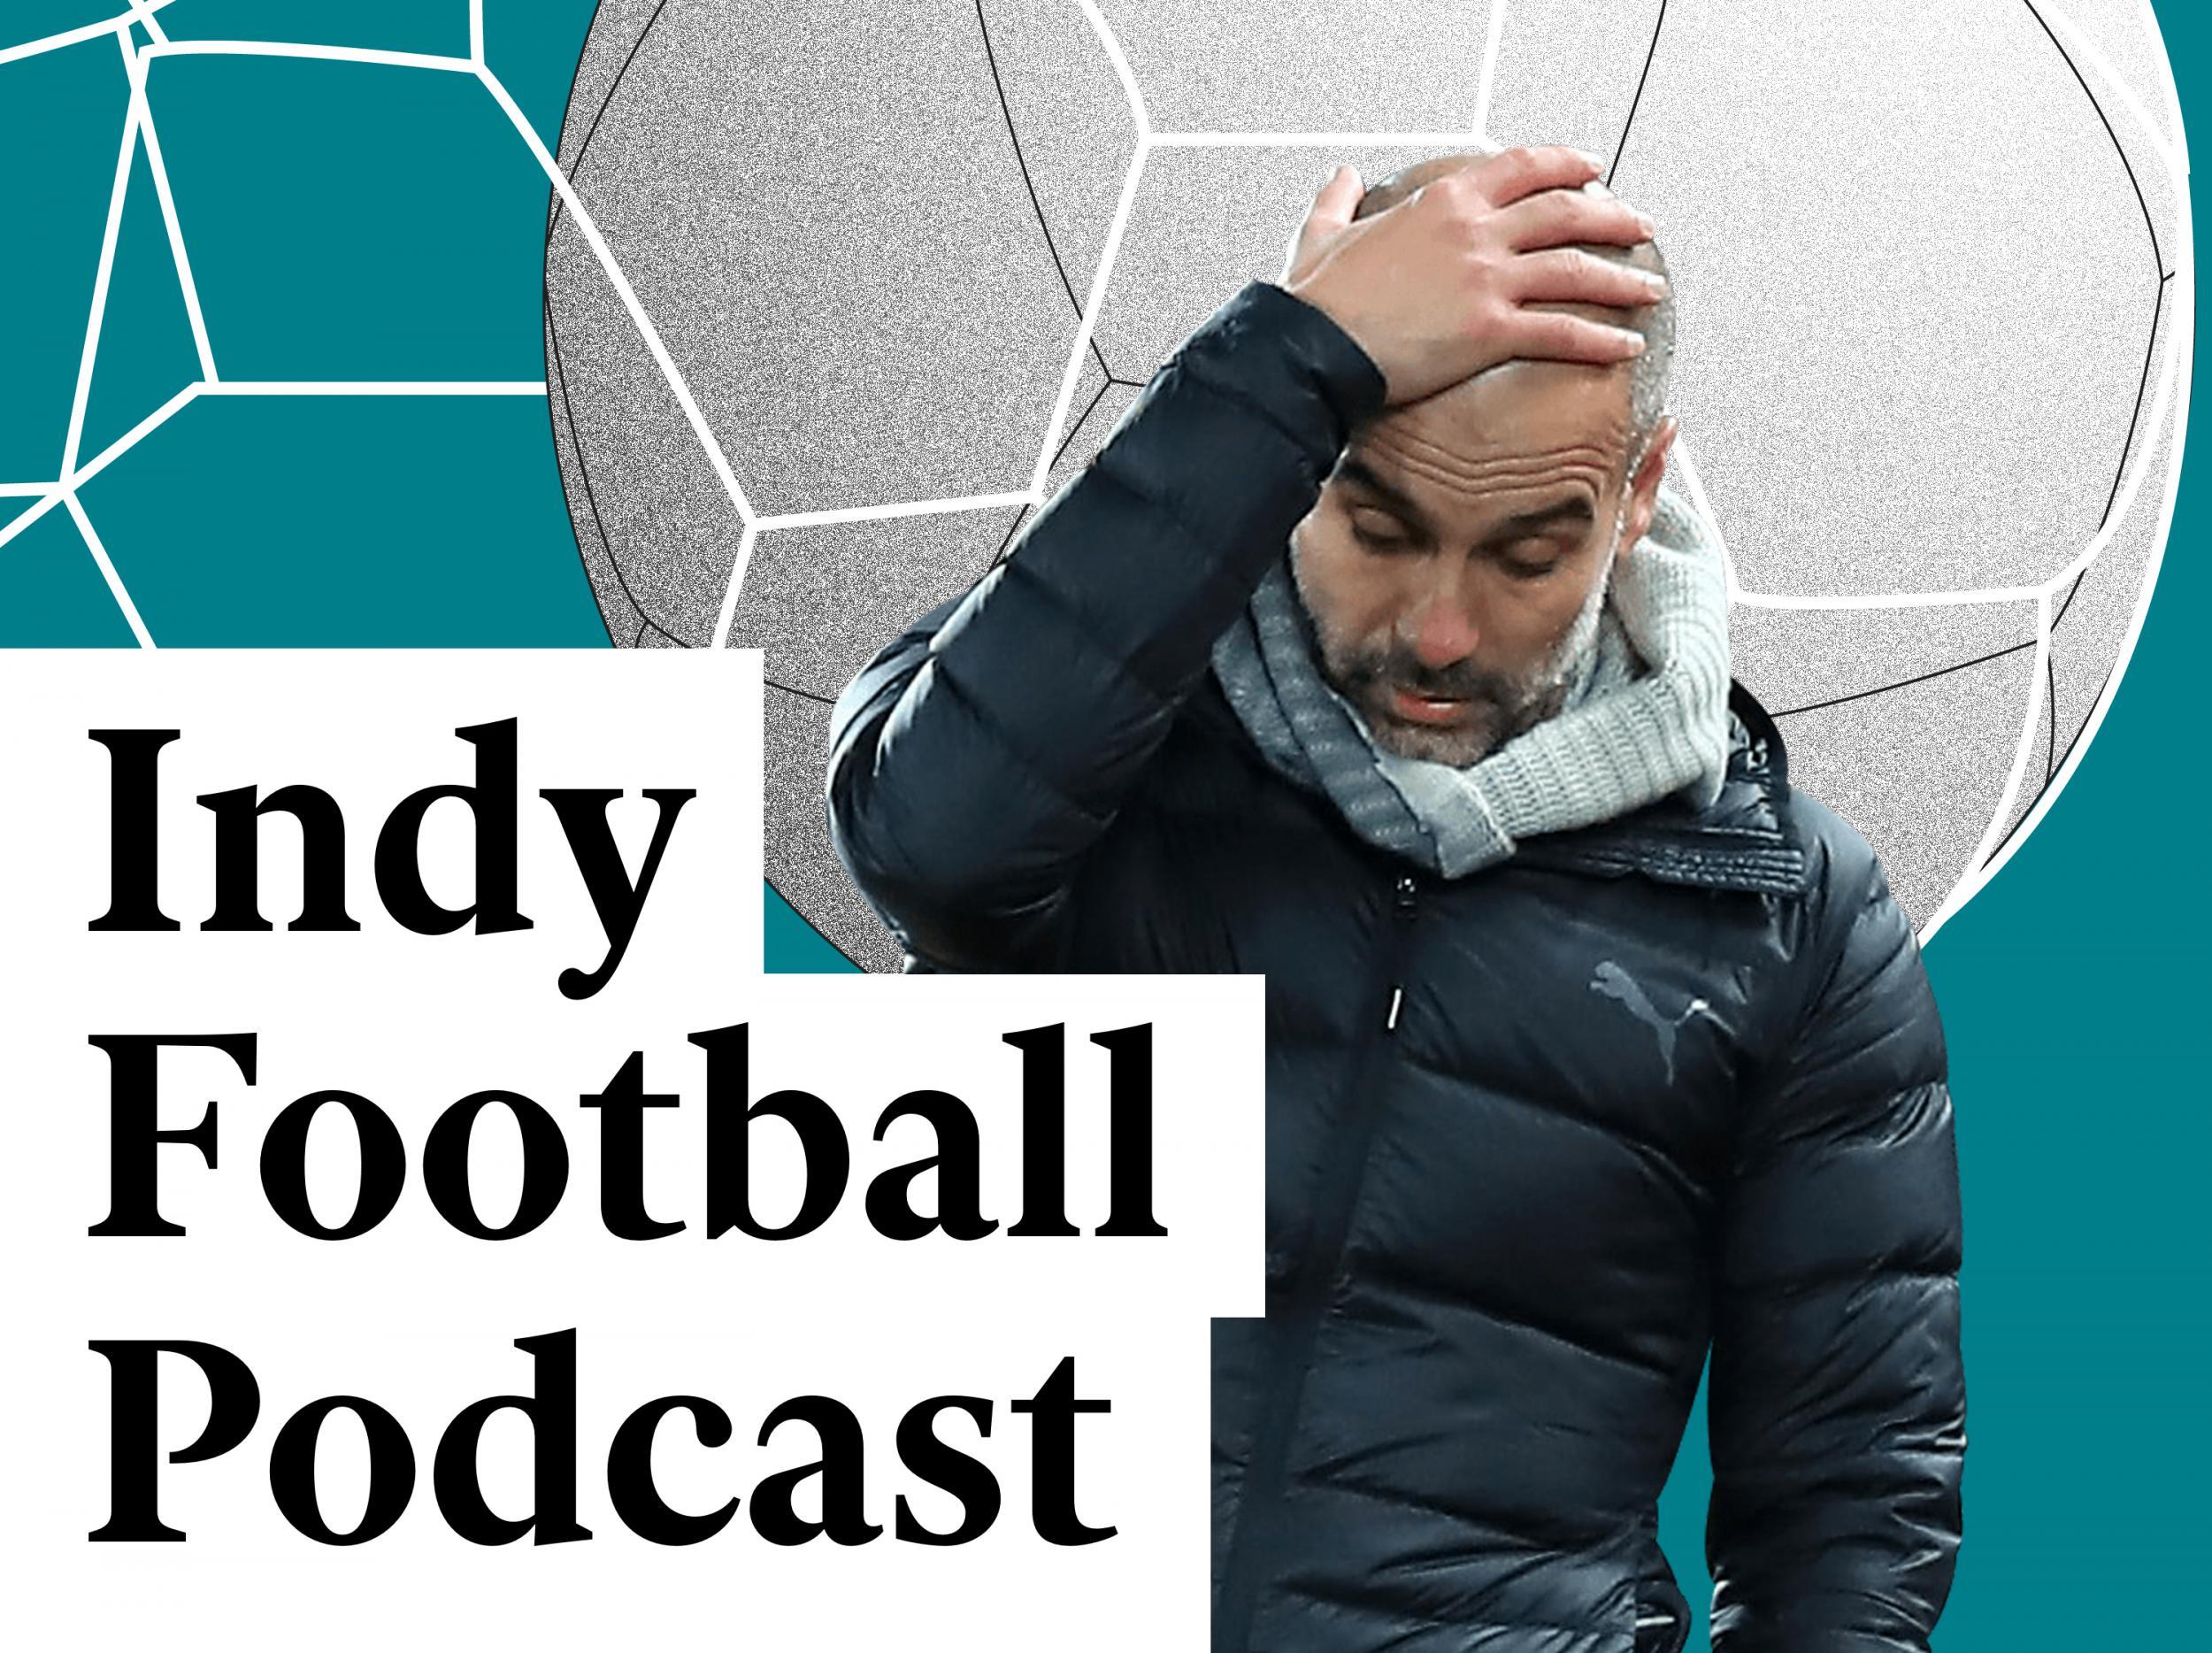 Listen to the latest Indy Football Podcast